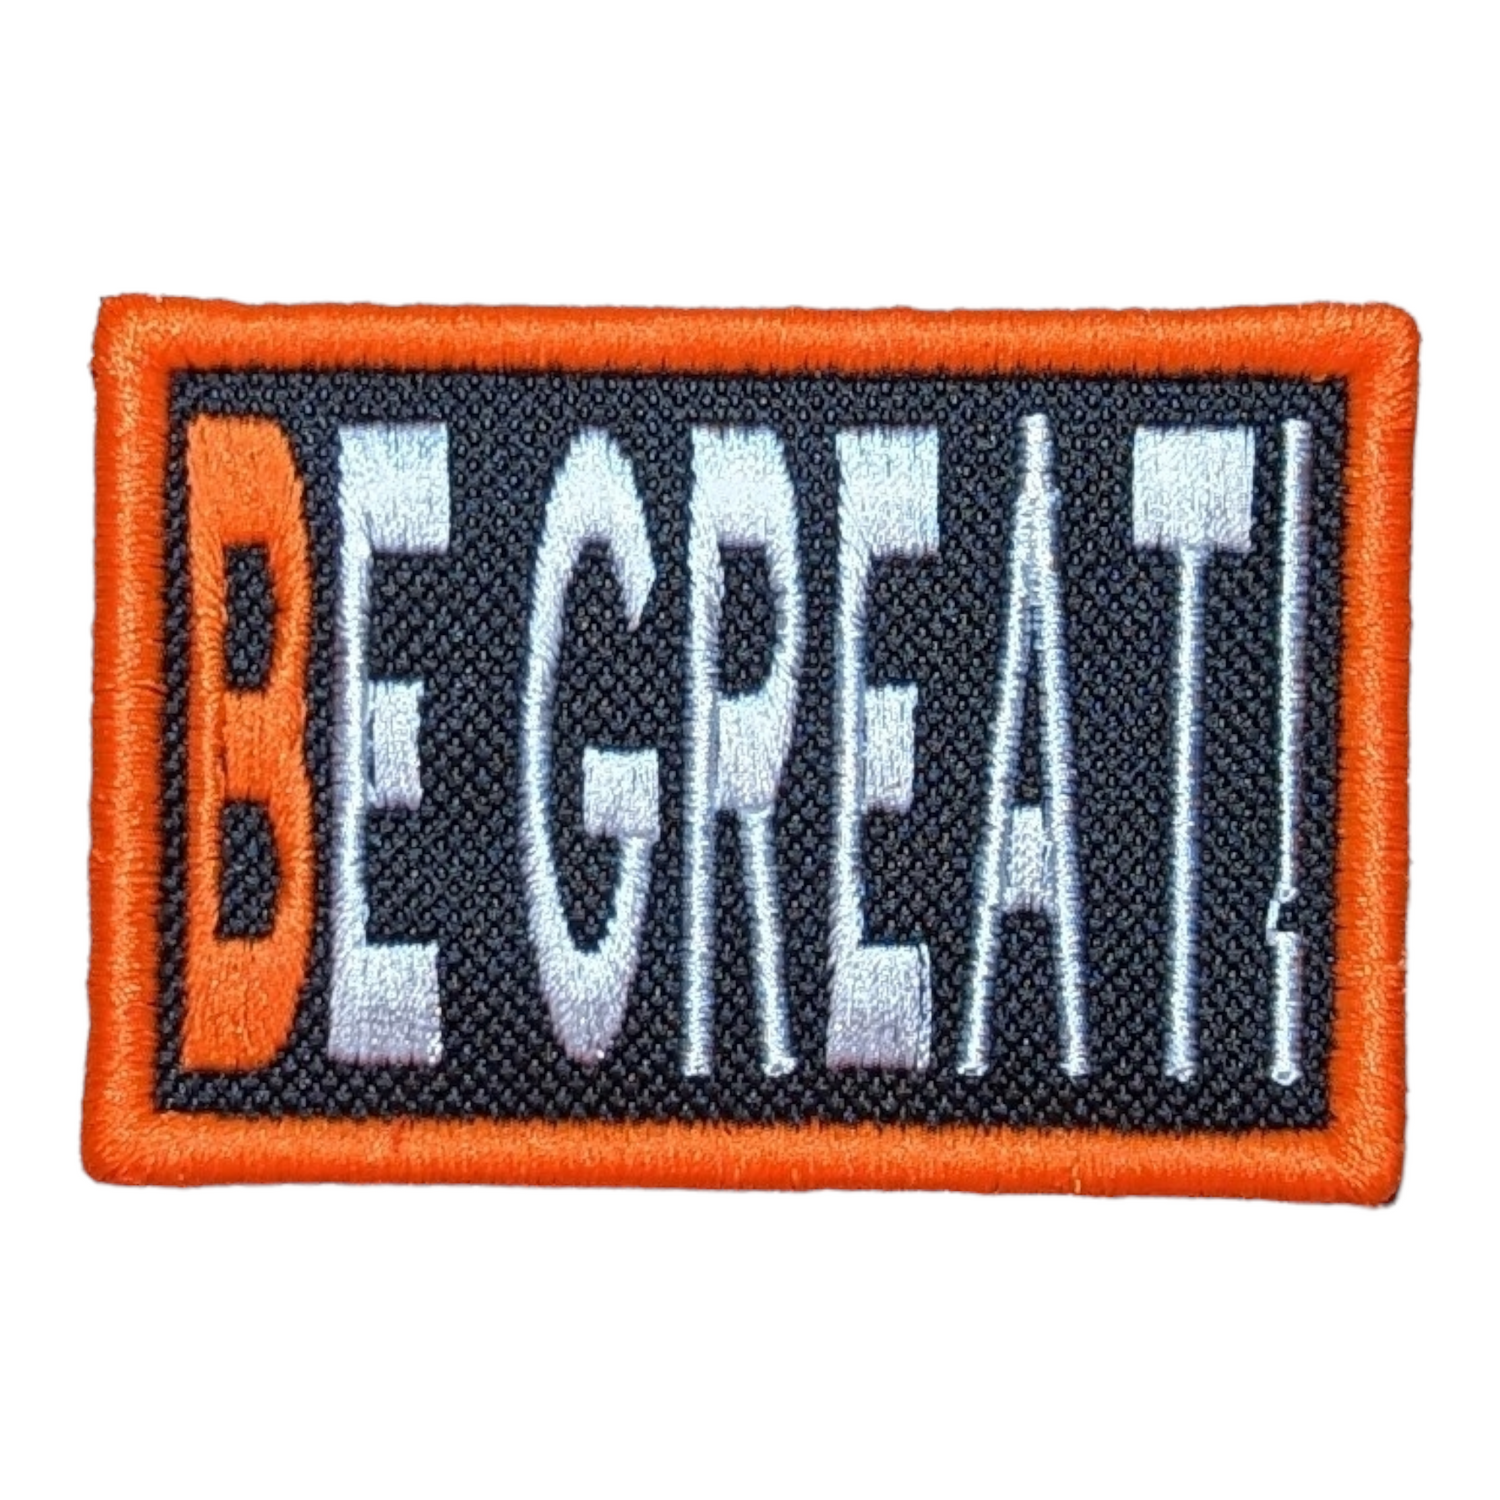 BE GREAT!